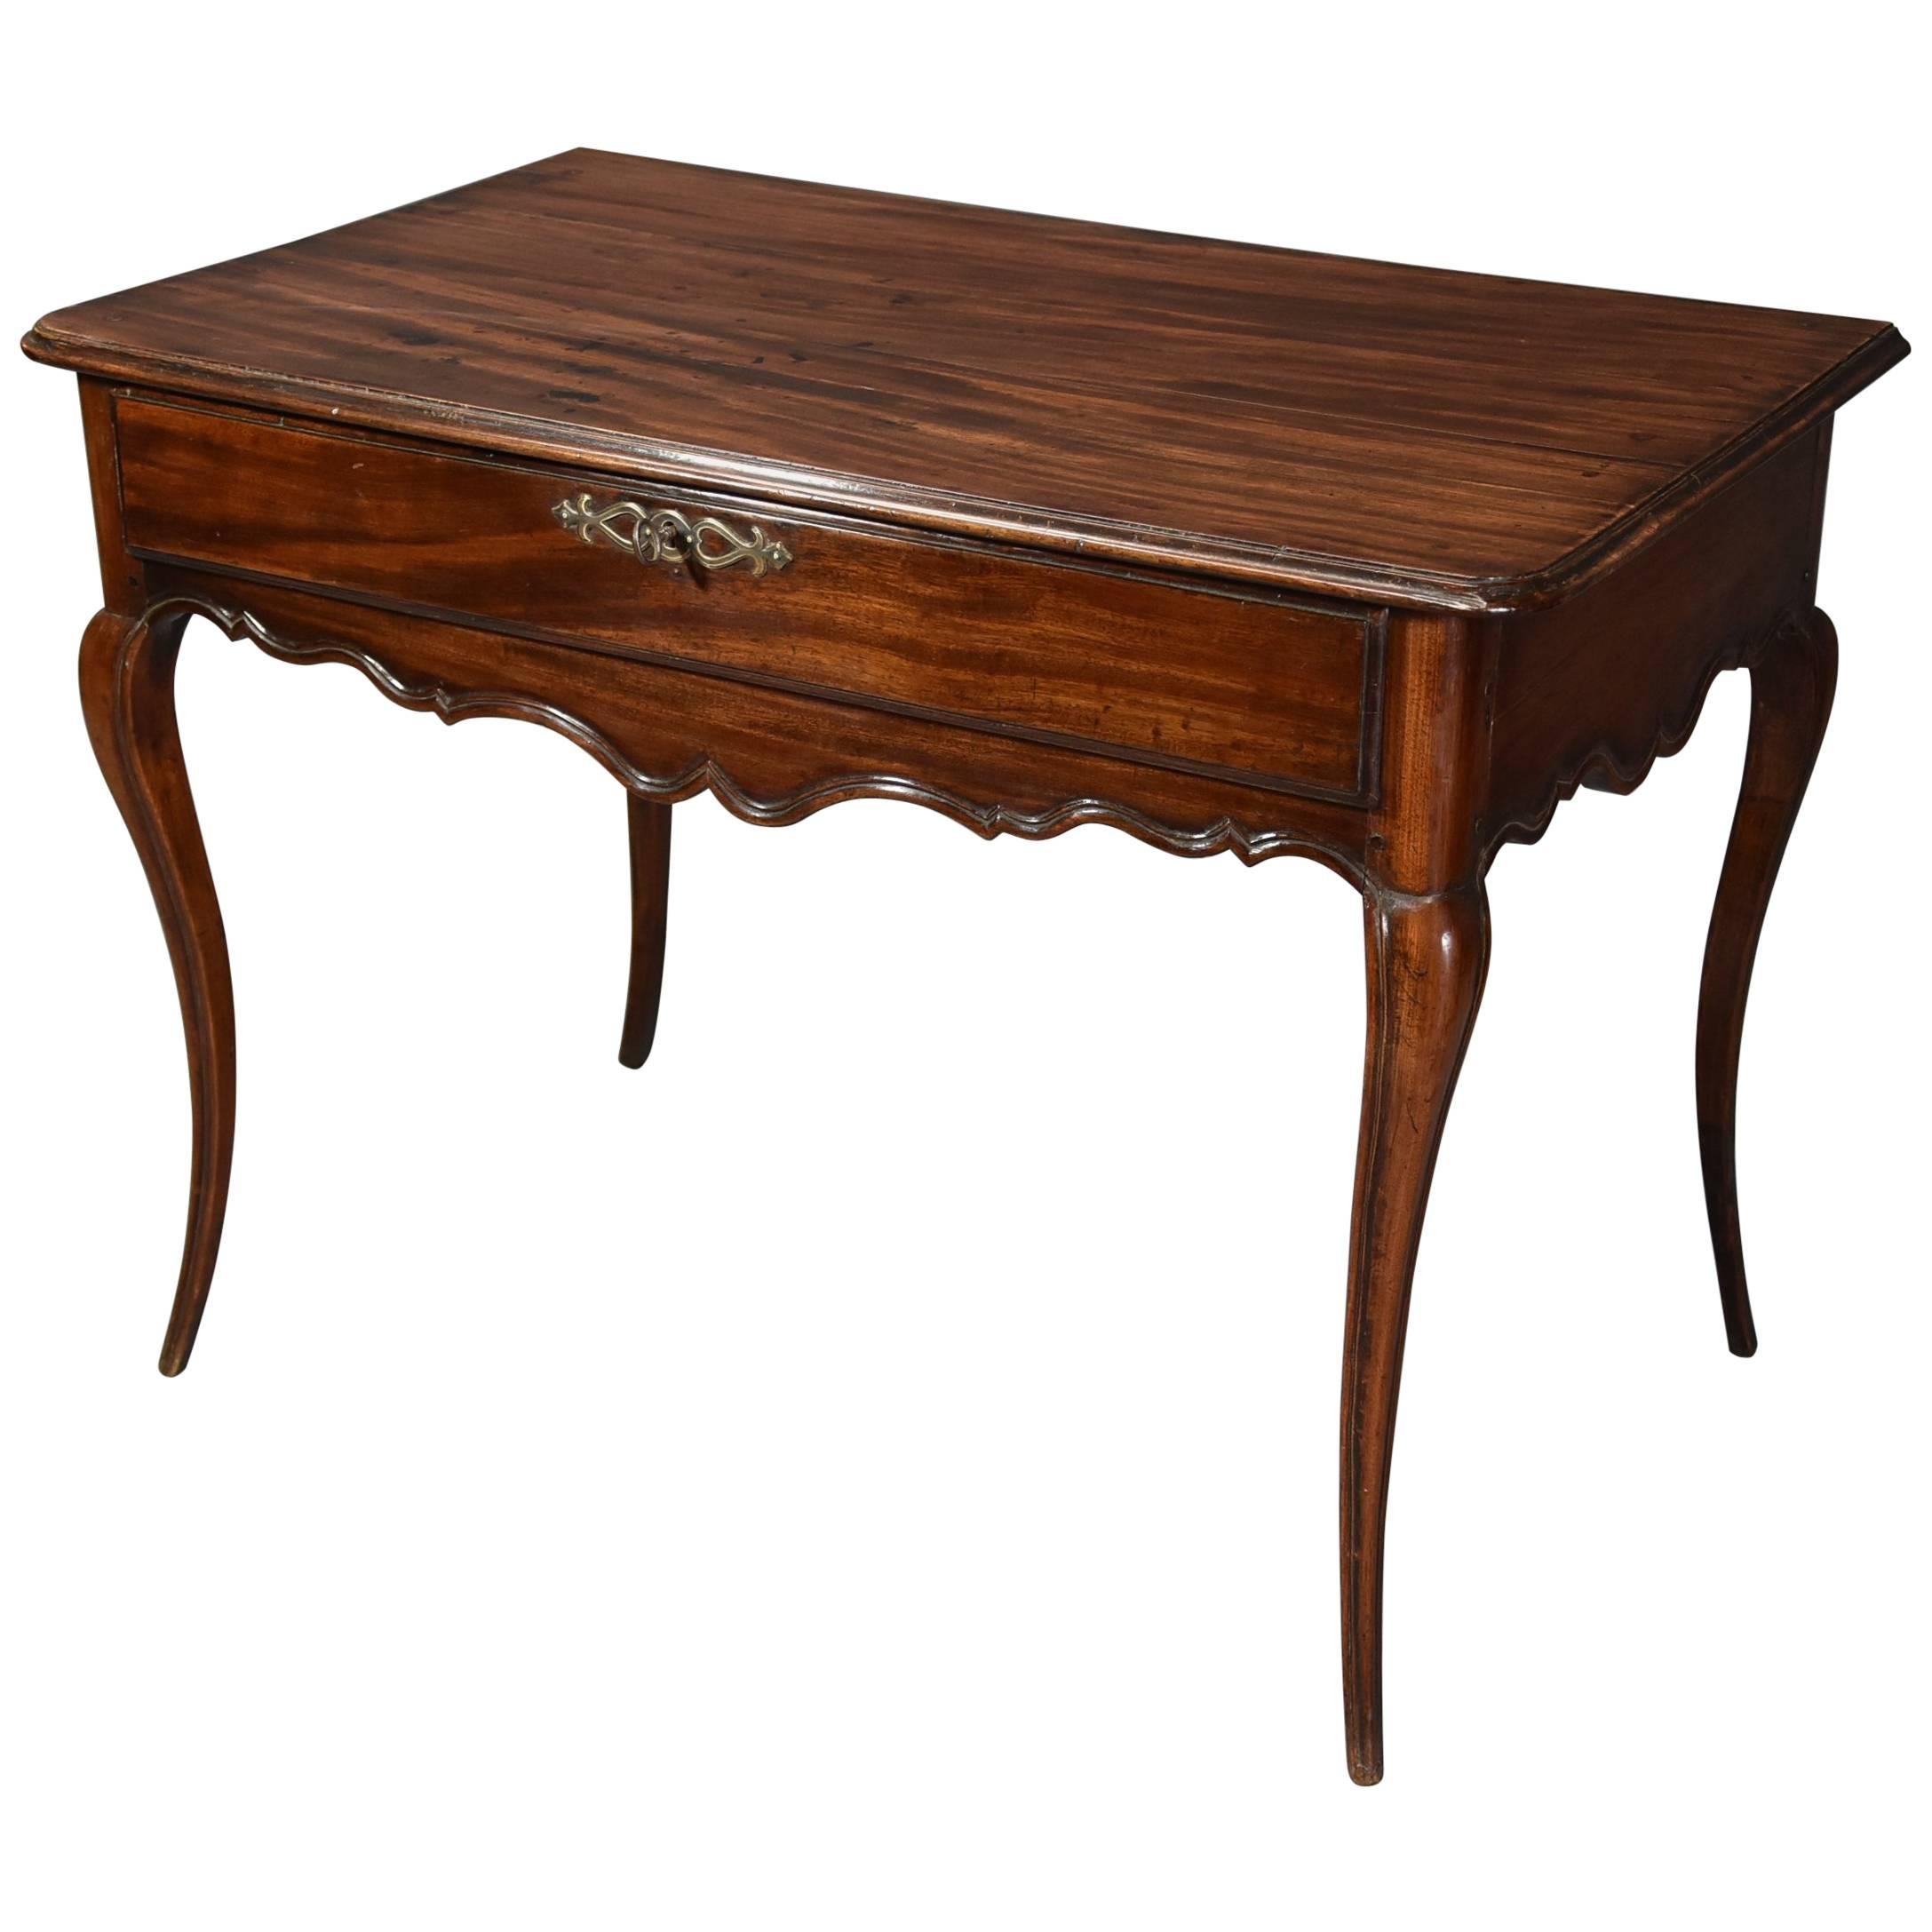 Late 18th Century French Walnut Side Table with Superb Rich Patina For Sale